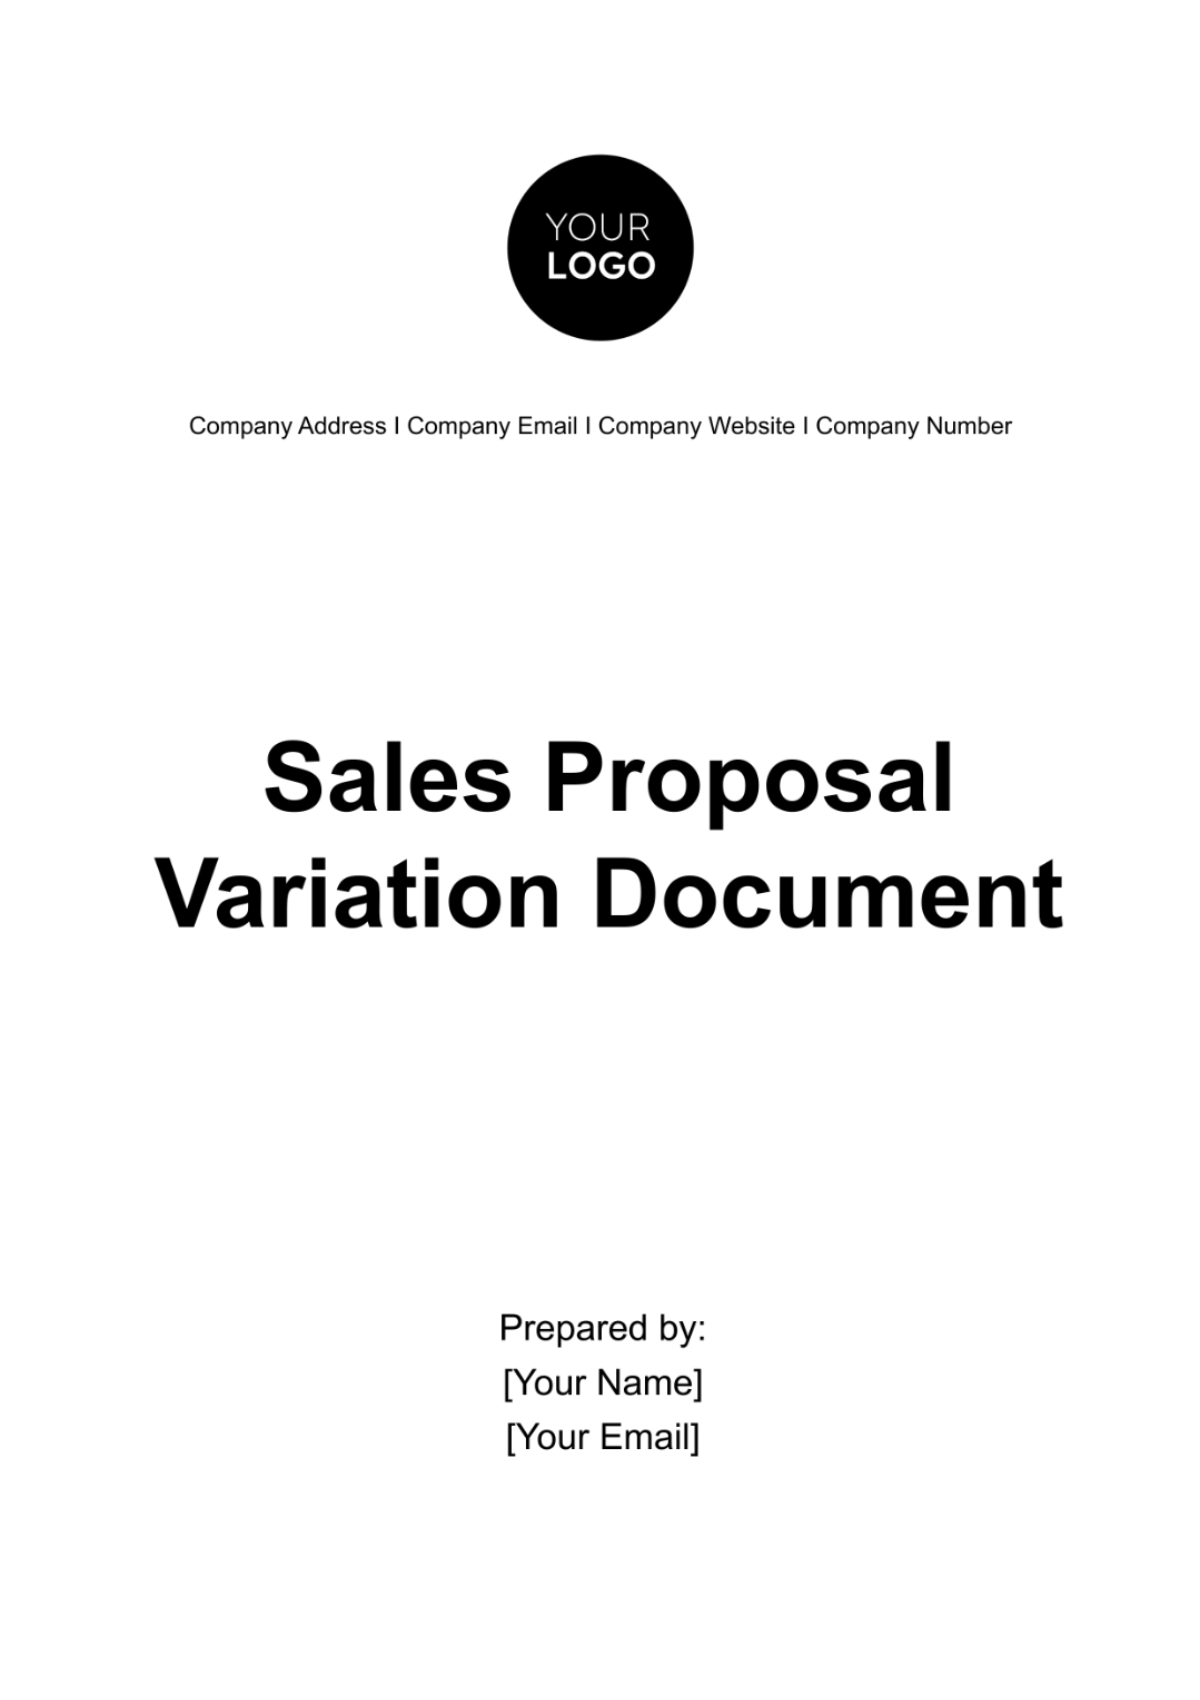 Free Sales Proposal Variation Document Template